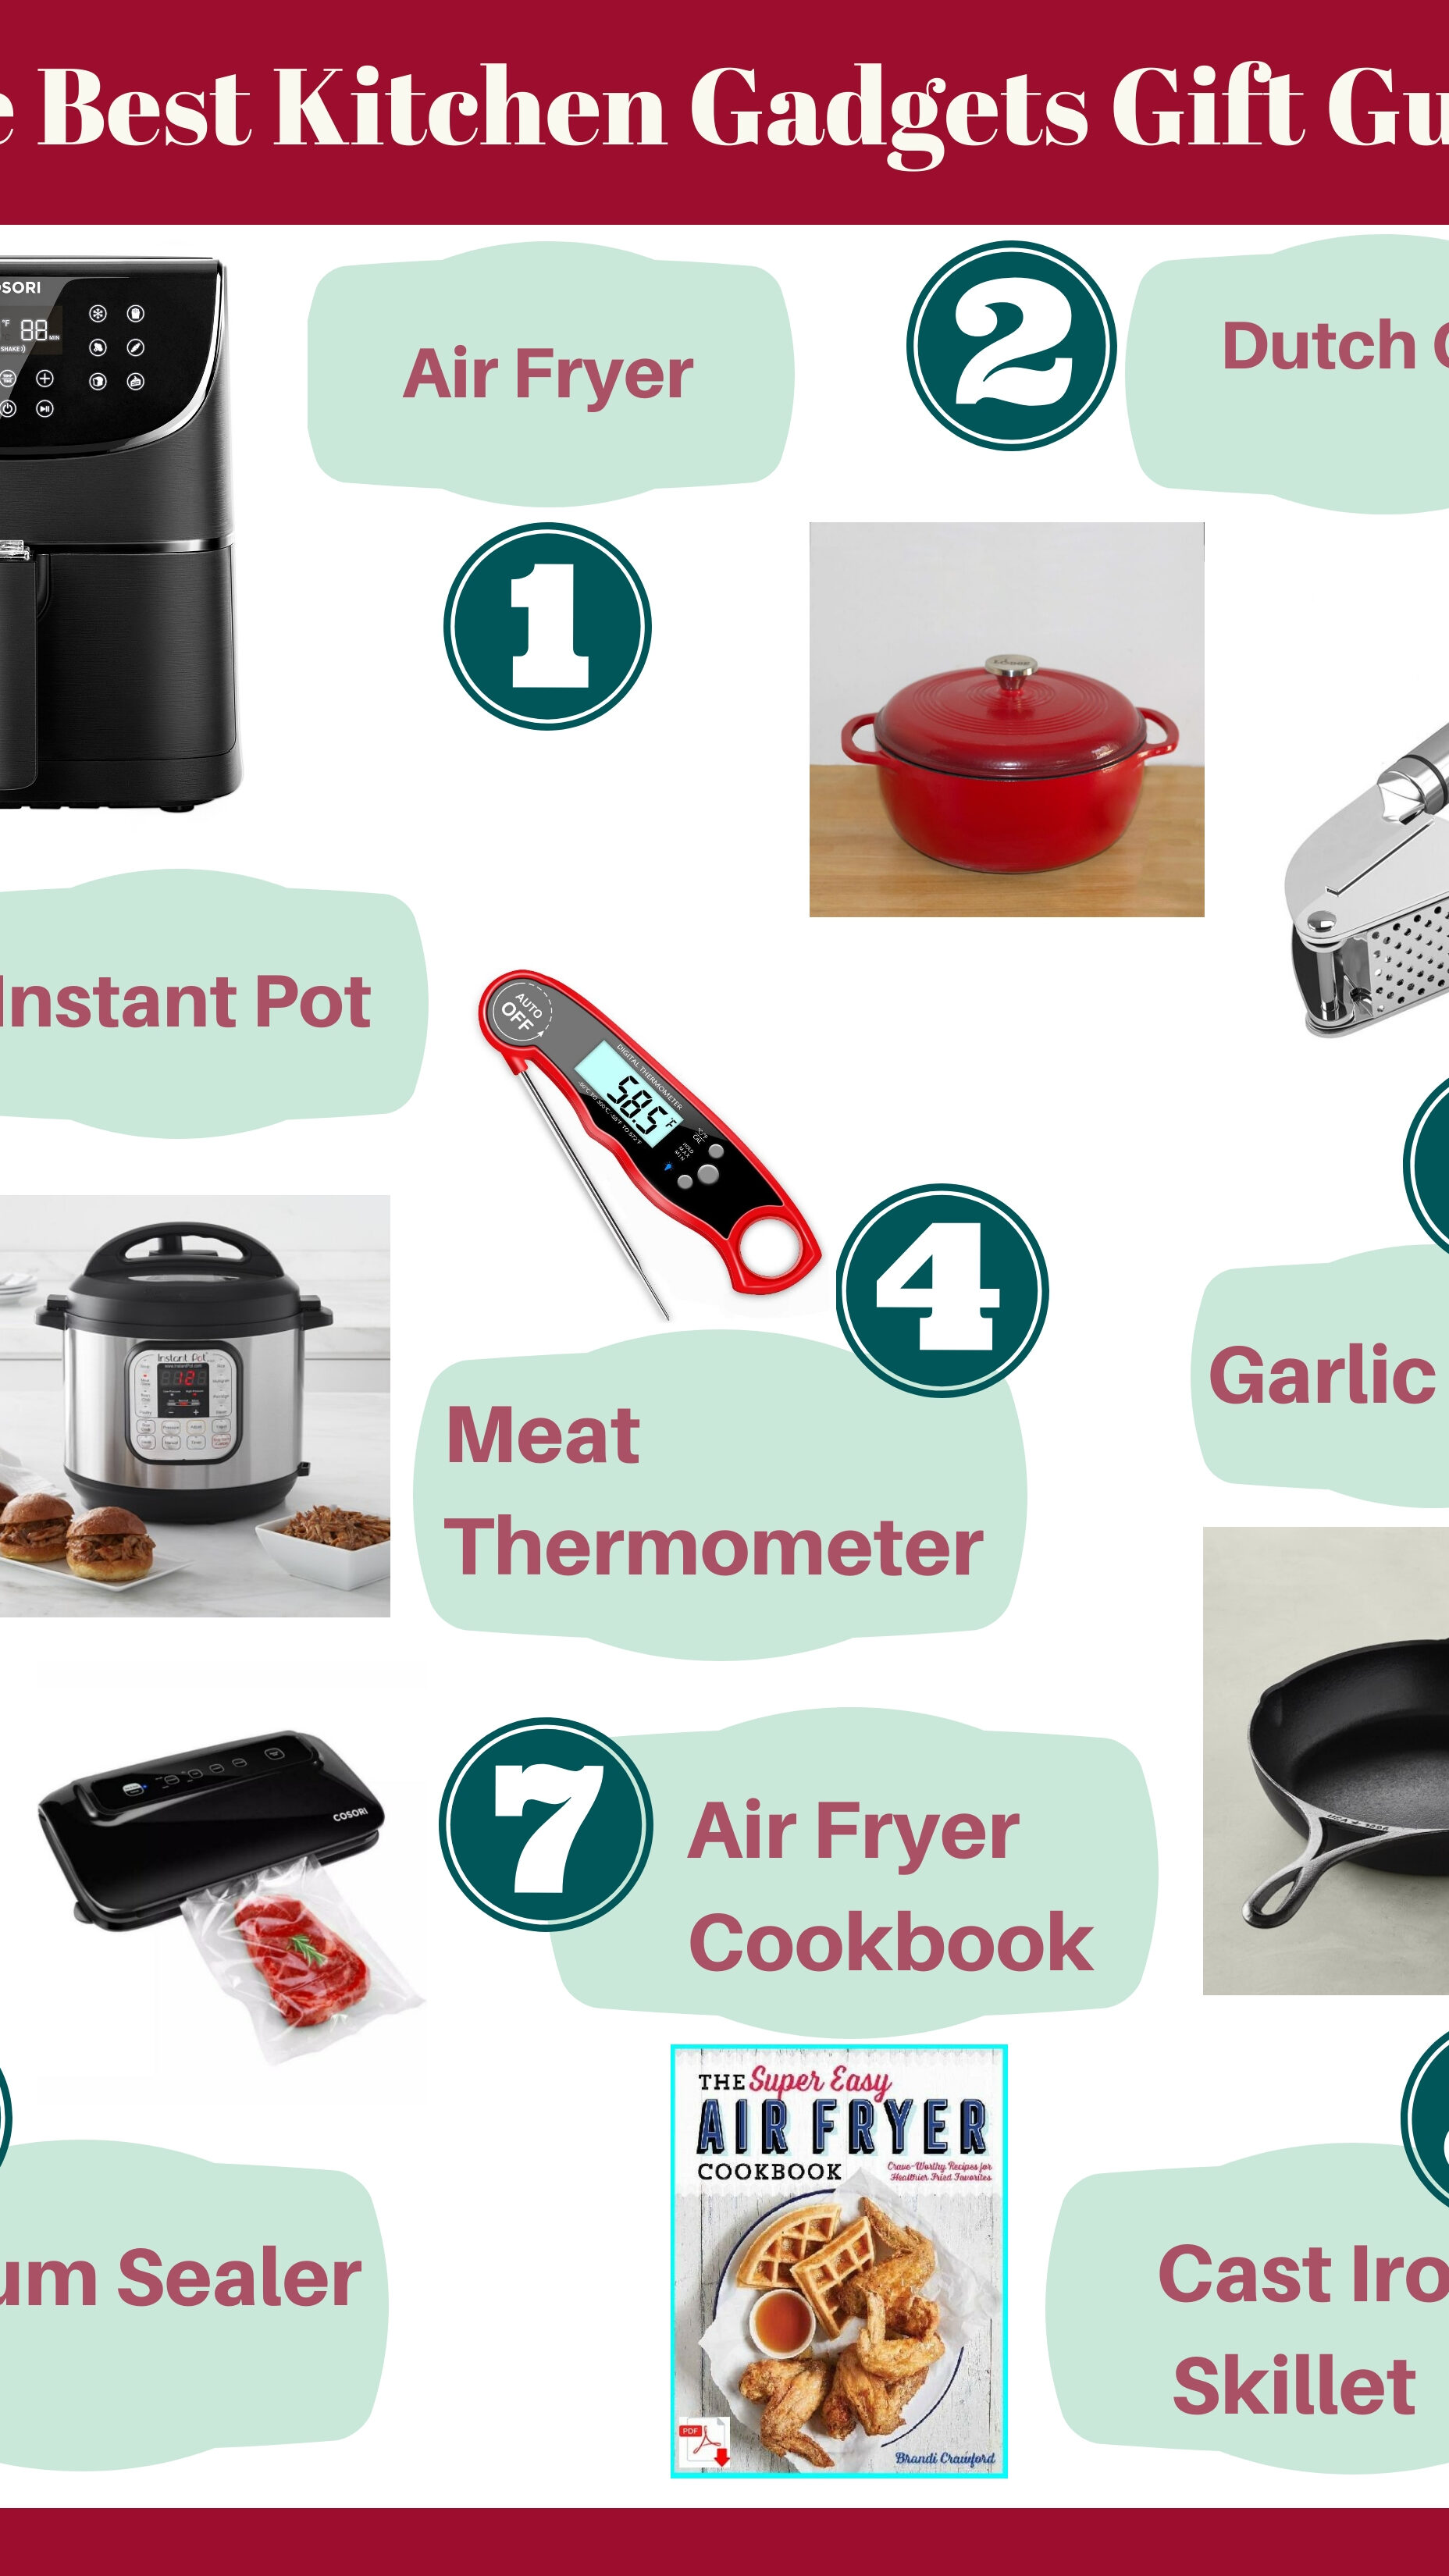 50 Useful Kitchen Gadgets You Didn't Know Existed  Kitchen gadgets gifts, Kitchen  gadgets, Gadget gifts